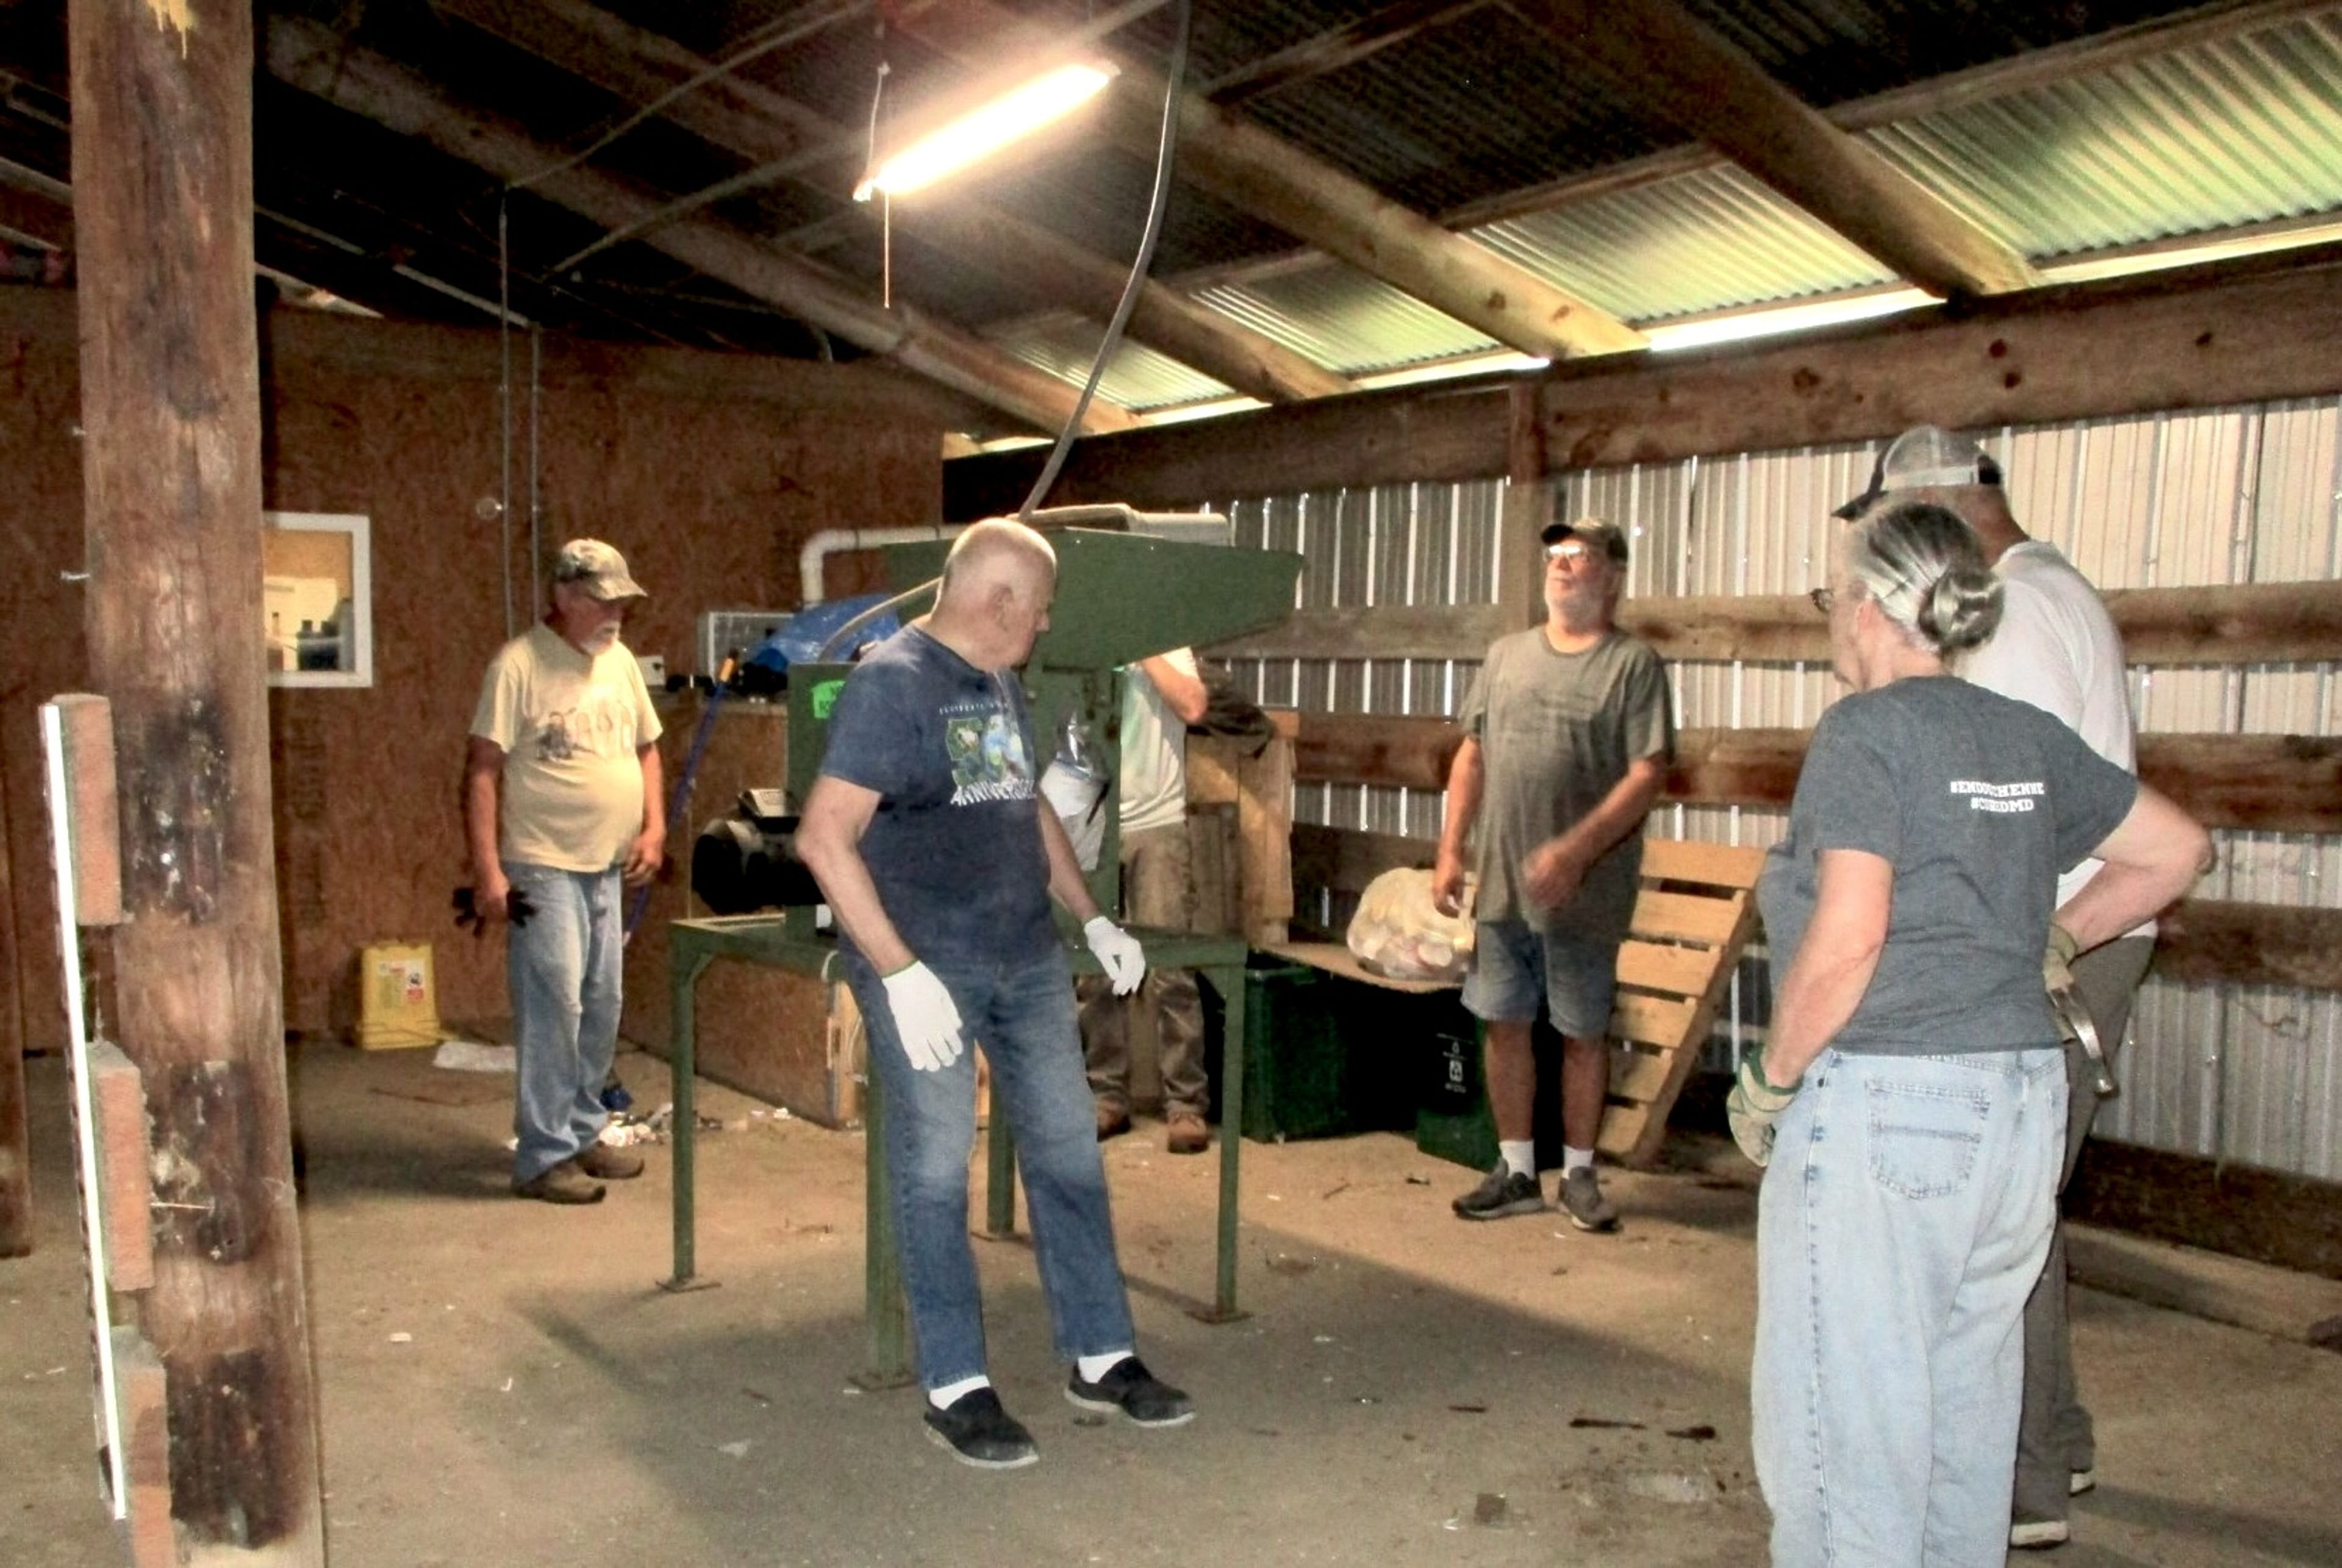 
The Bollinger County Recycling Center manager, Allen, directs a crew of volunteers on a recent work day at the center. Pictured (from left) are Frank Bridges, Roger Burr, Bill Teeters behind the can crusher, Allen, Mike Trehy and Lisa Santi.
